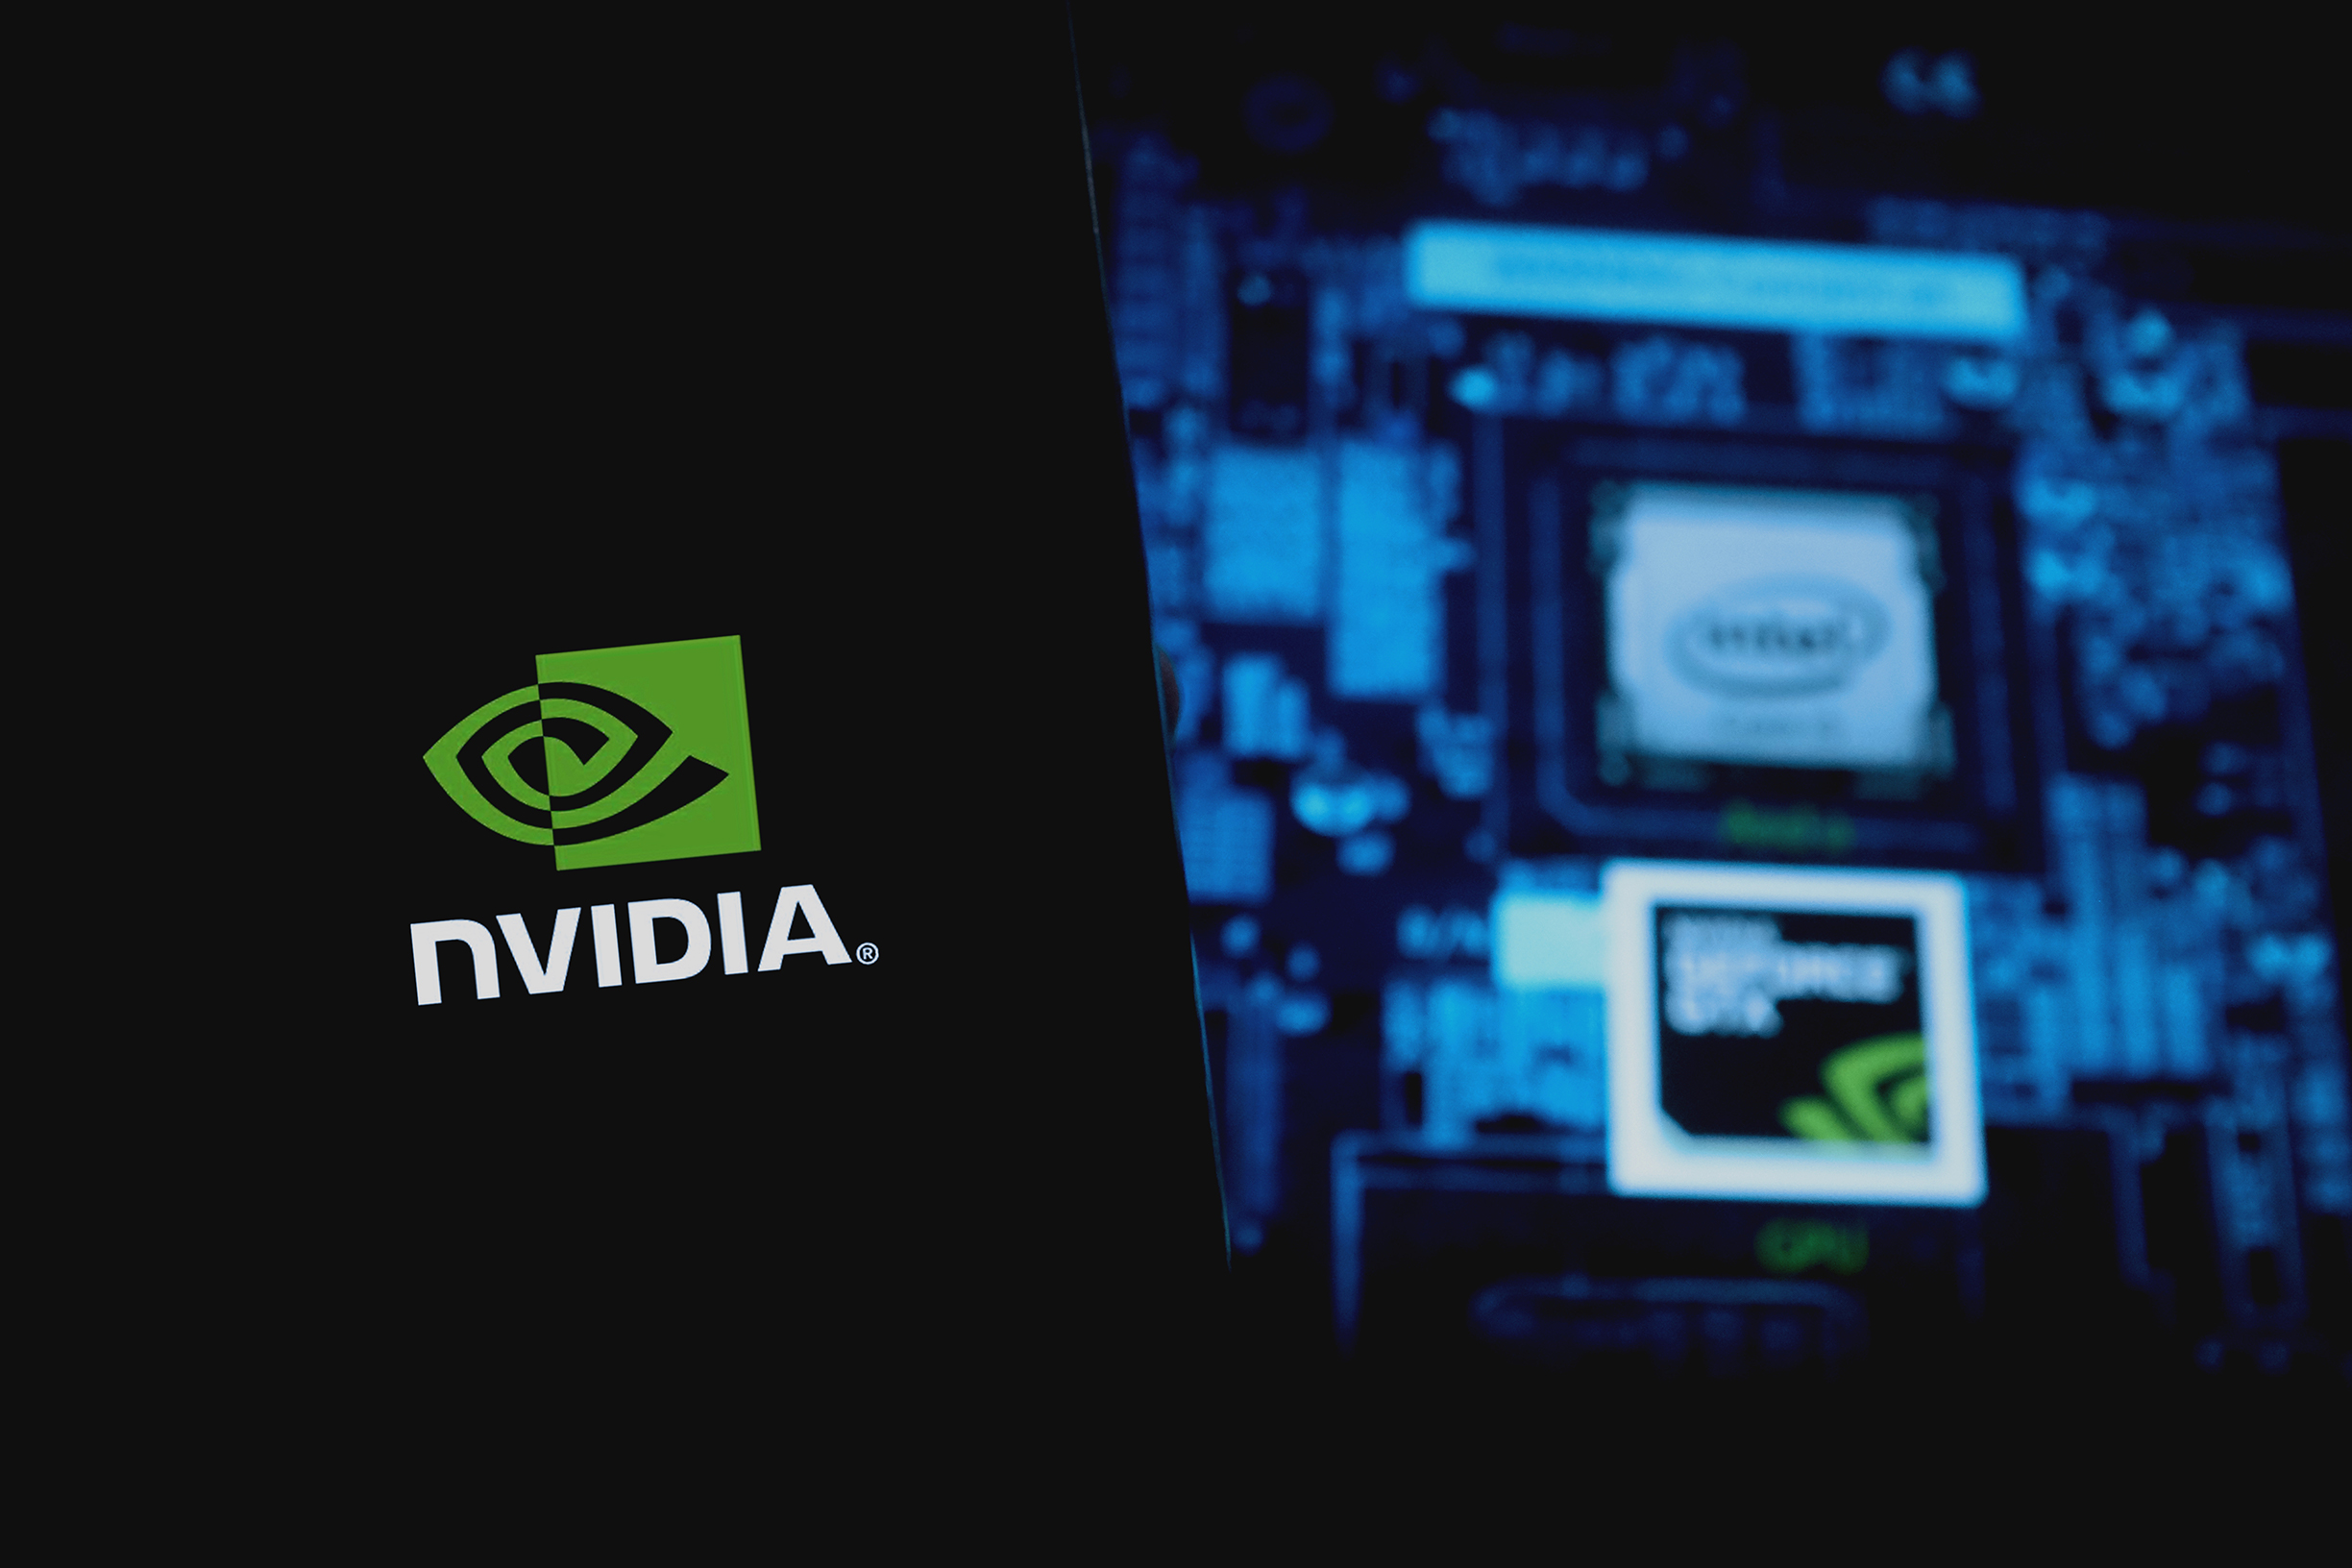 NVIDIA: Inventors of GPUs and Leading Company in the GPU Industry